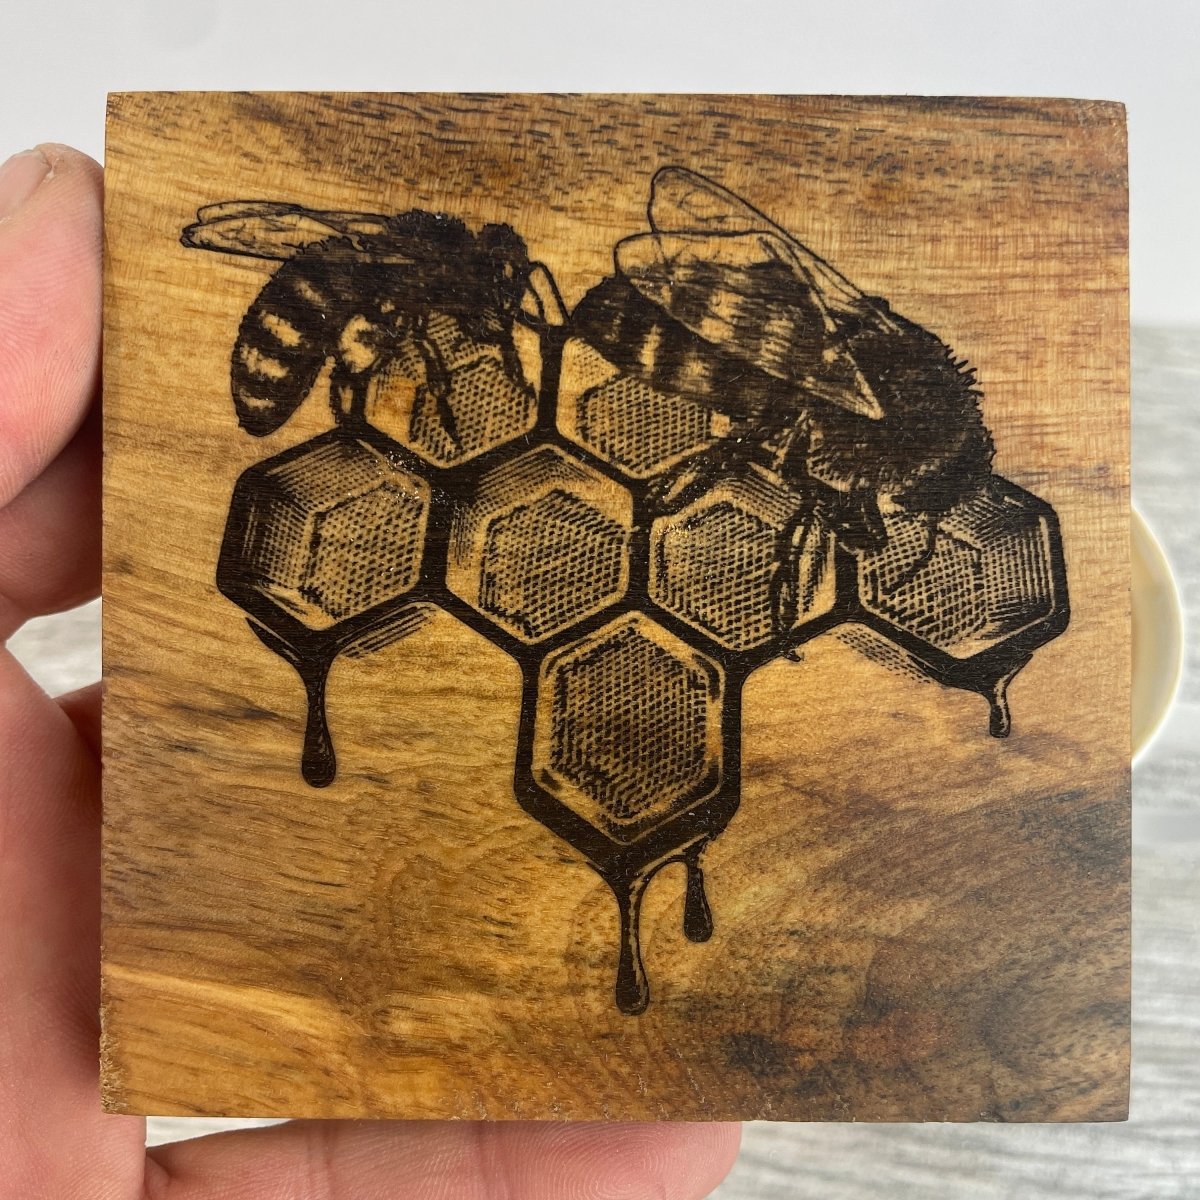 Wood Coaster Set (2) with Bee Images - DaRosa Creations